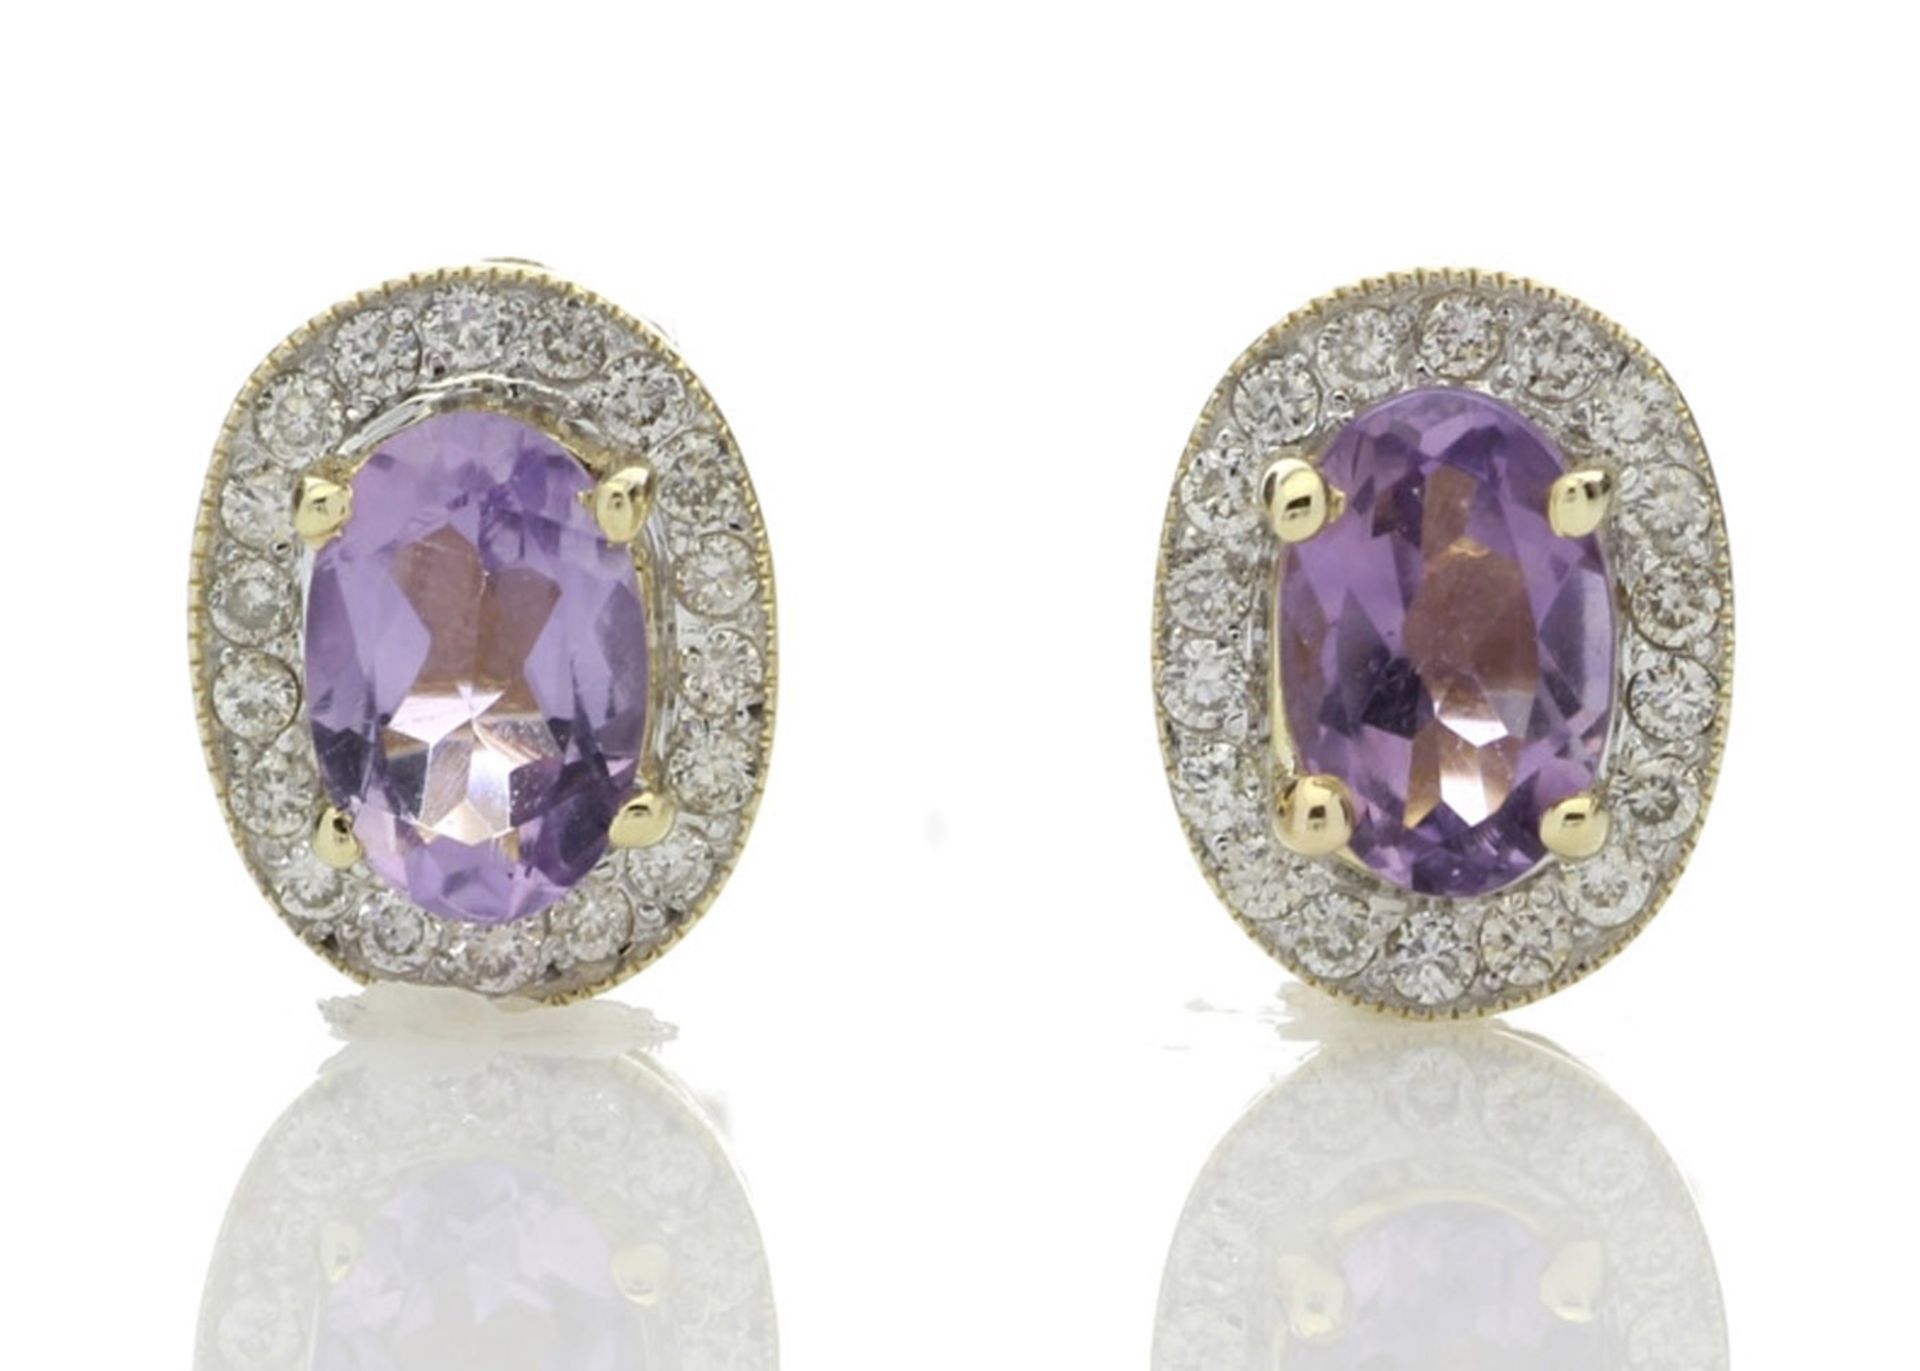 9ct Yellow Gold Amethyst and Diamond Cluster Earring (A0.86) 0.18 Carats - Image 5 of 7